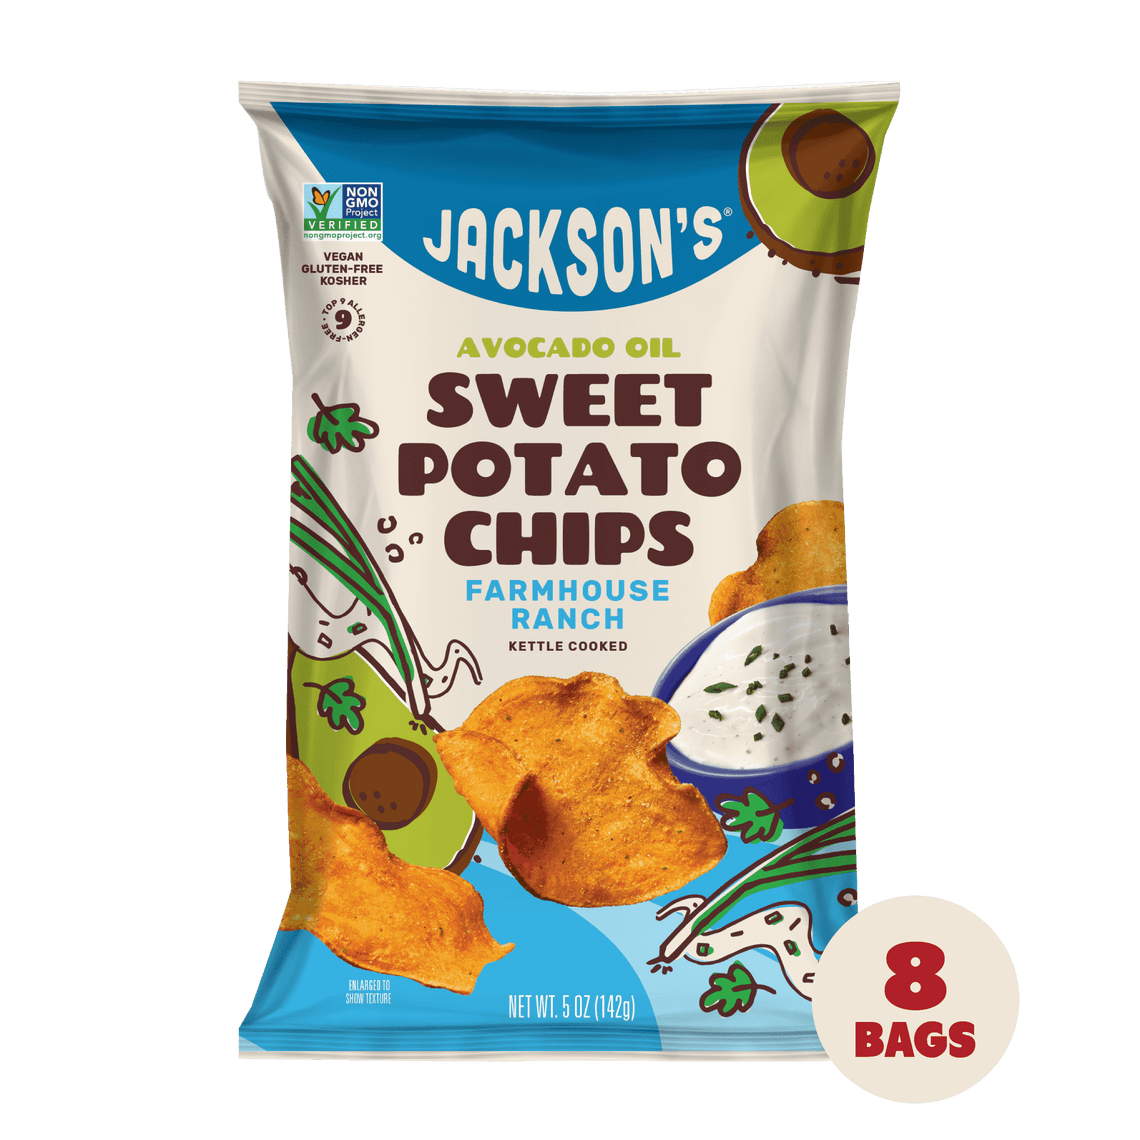 Dairy-Free Farmhouse Ranch Sweet Potato Chips in premium Avocado Oil 5oz - 8 Bags. Crispy and savory snack 